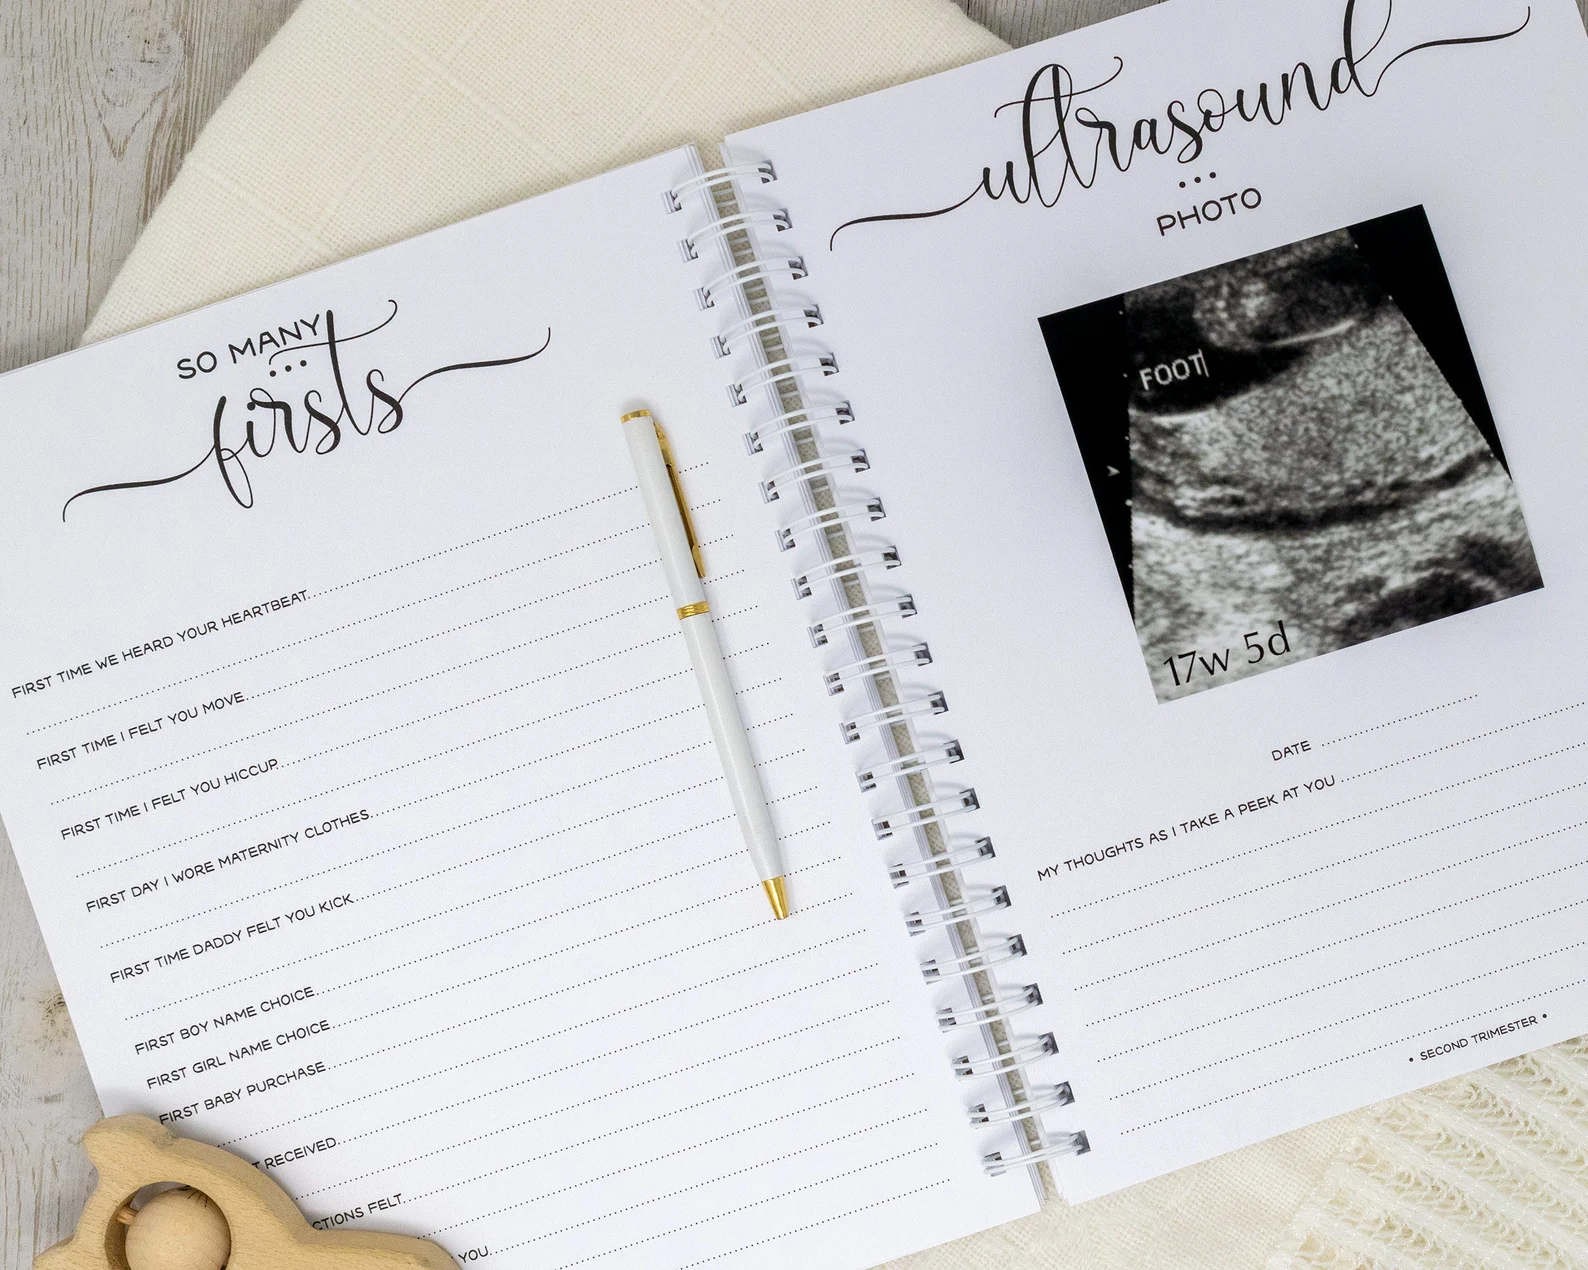 Hard Cover Pregnancy Journal & Memory Book for Expectant Moms - Personalized Keepsake Pregnancy Album - New Mother Gift - Woodsy Friends